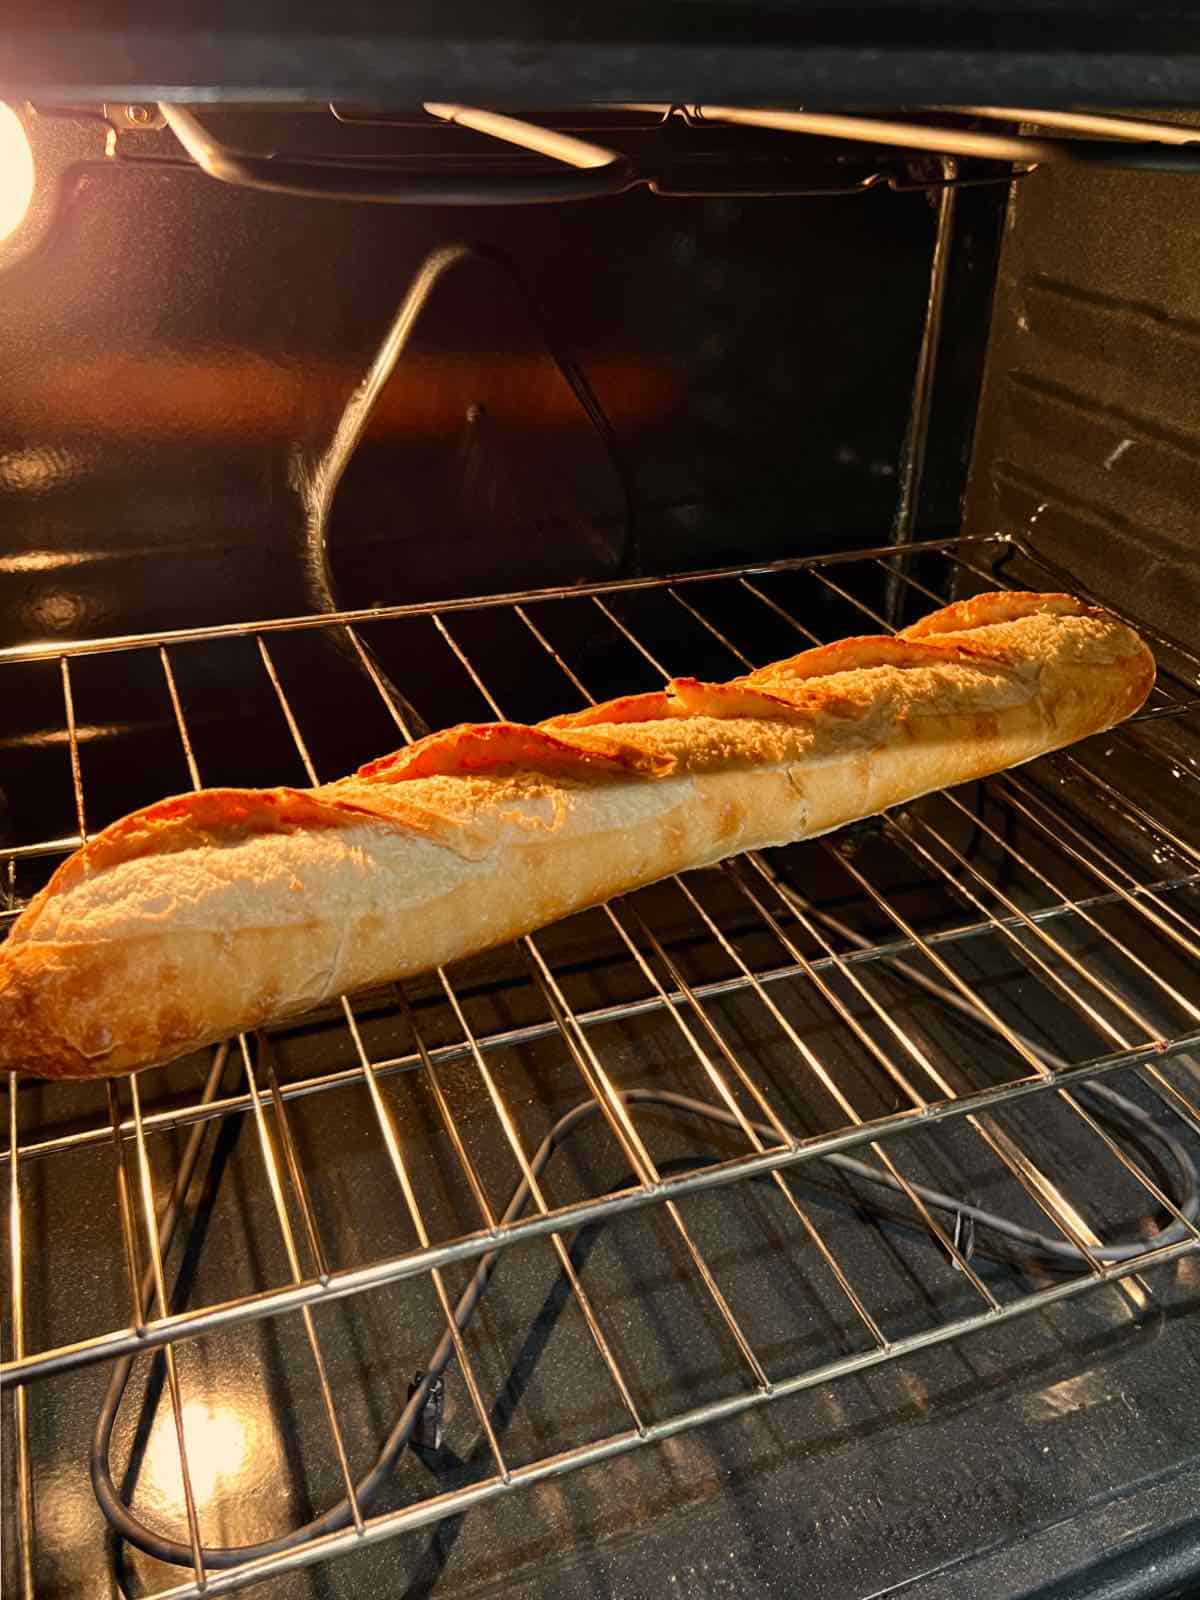 softening a stale french baguette in the oven